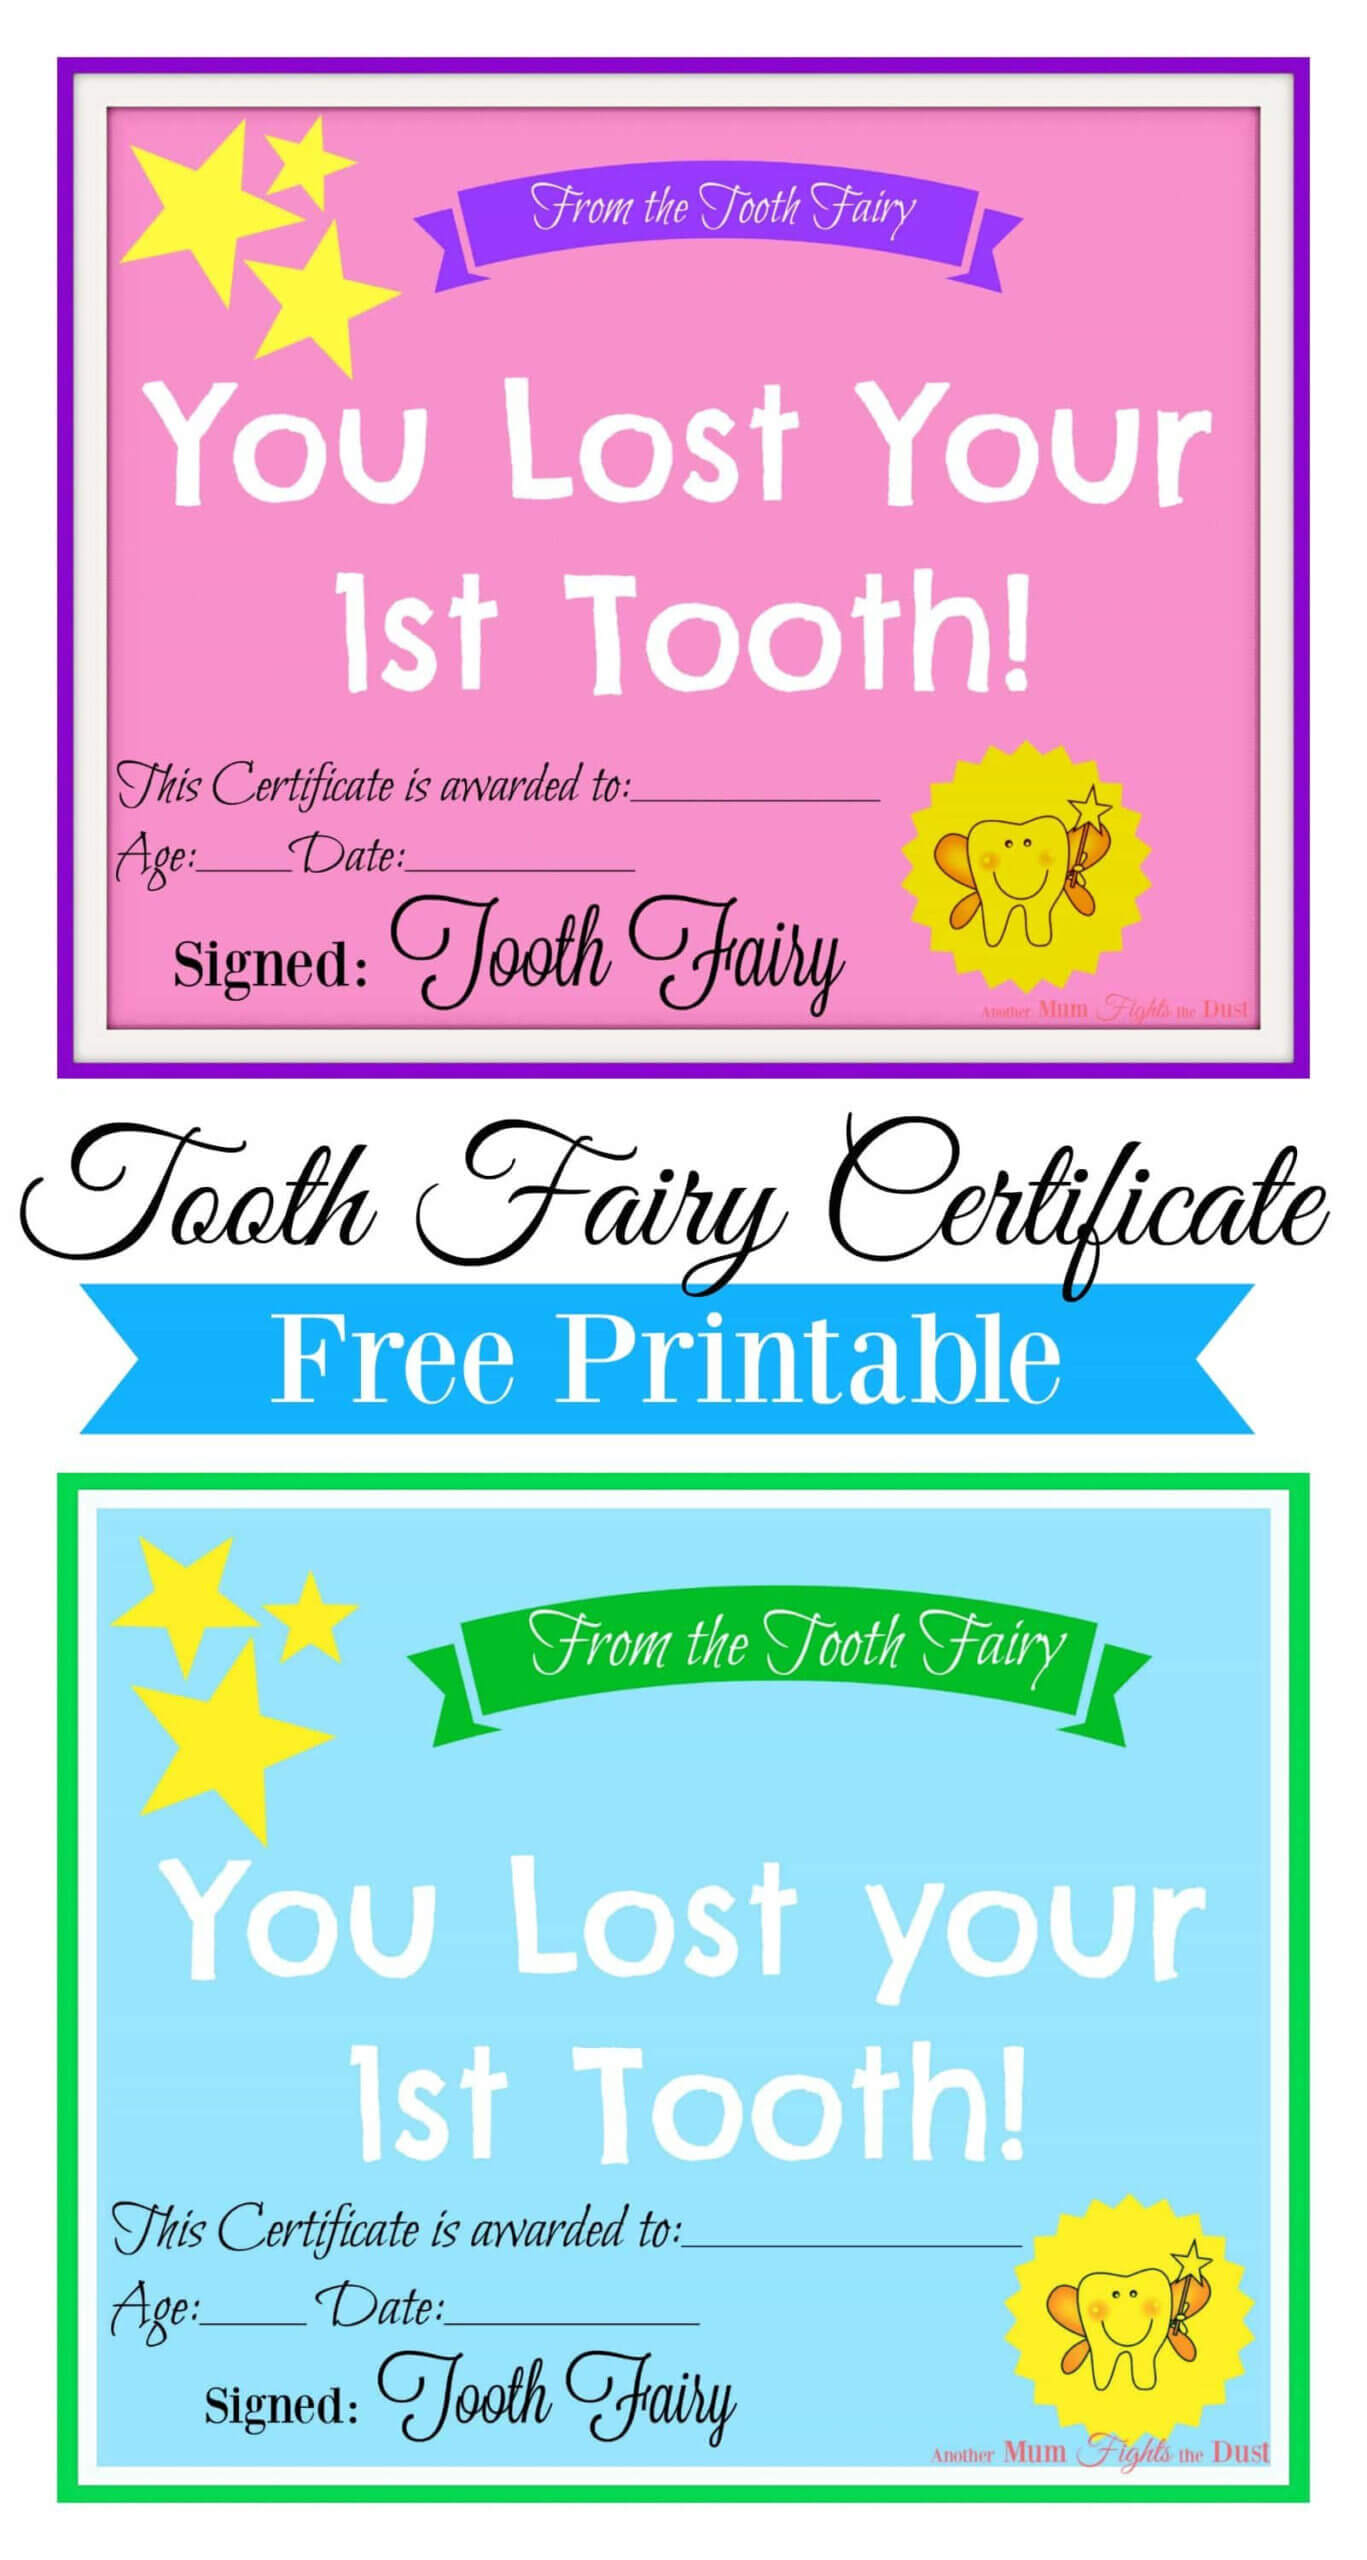 Free Printable Tooth Fairy Certificate | Tooth Fairy Inside Free Tooth Fairy Certificate Template